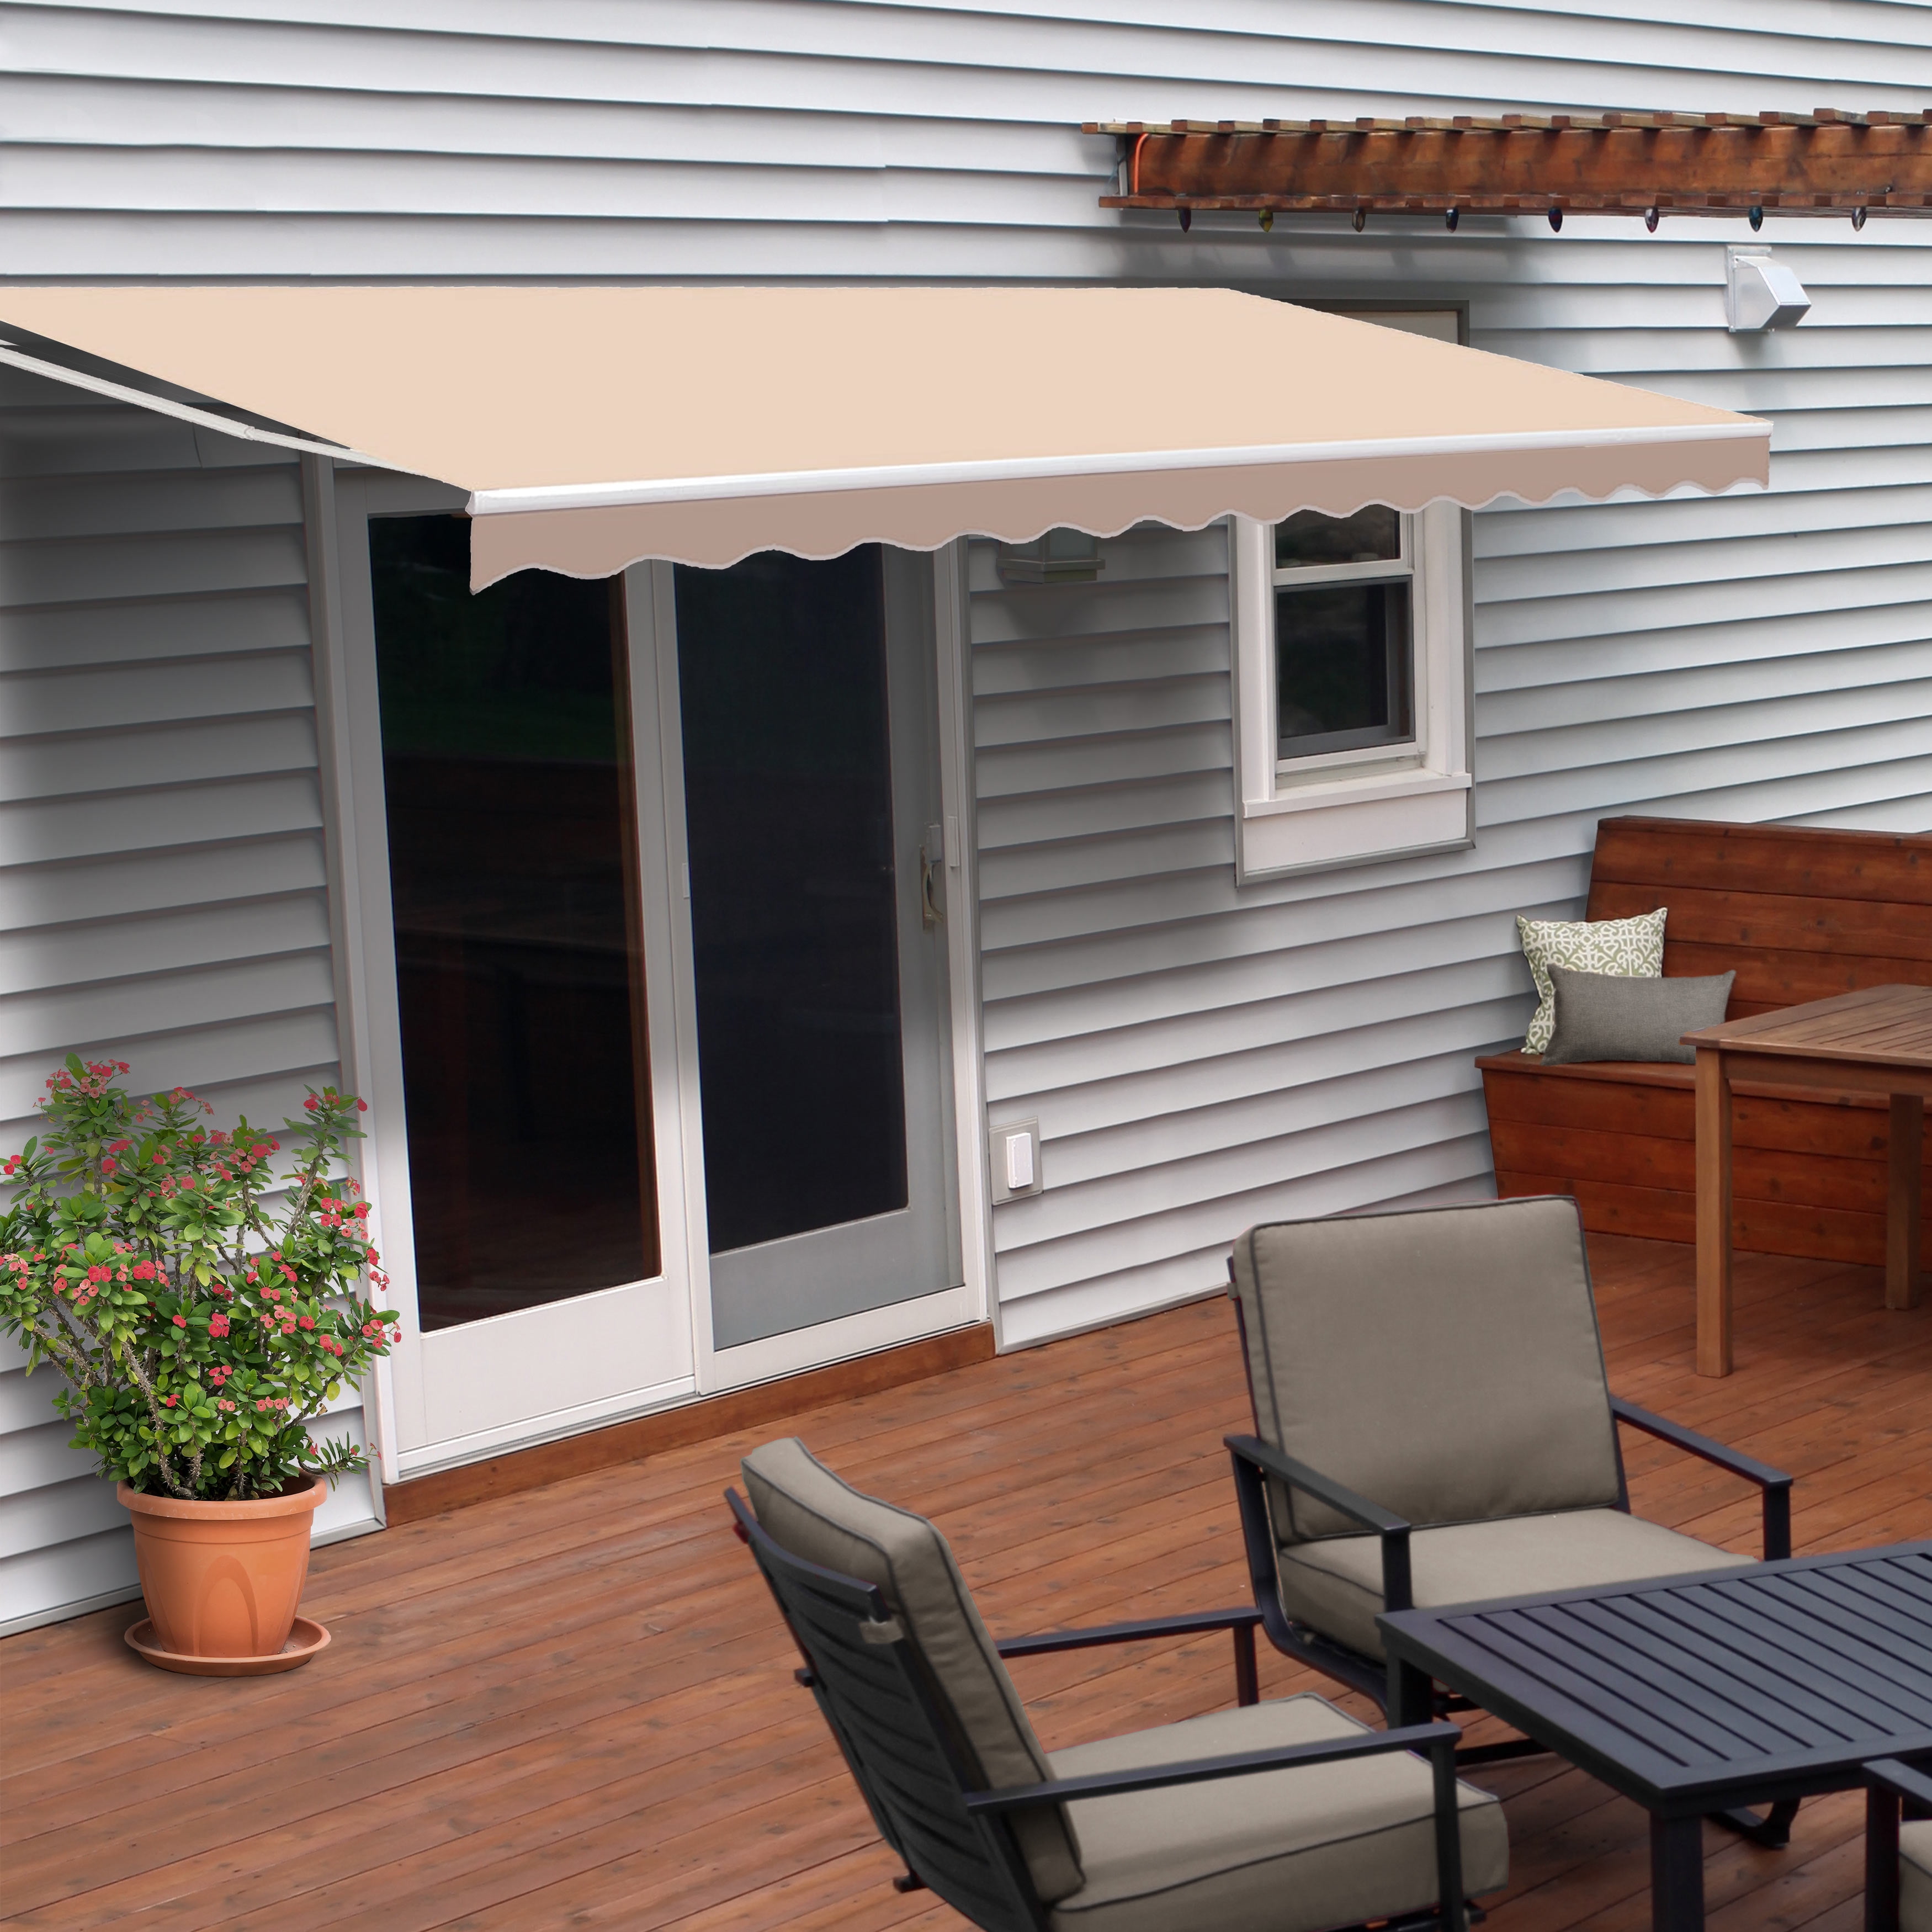 The Fellie Garden Awnings L2xW1.5m Manual Patio Awning Retractable Canopy Outdoor Sun Shader Blue White